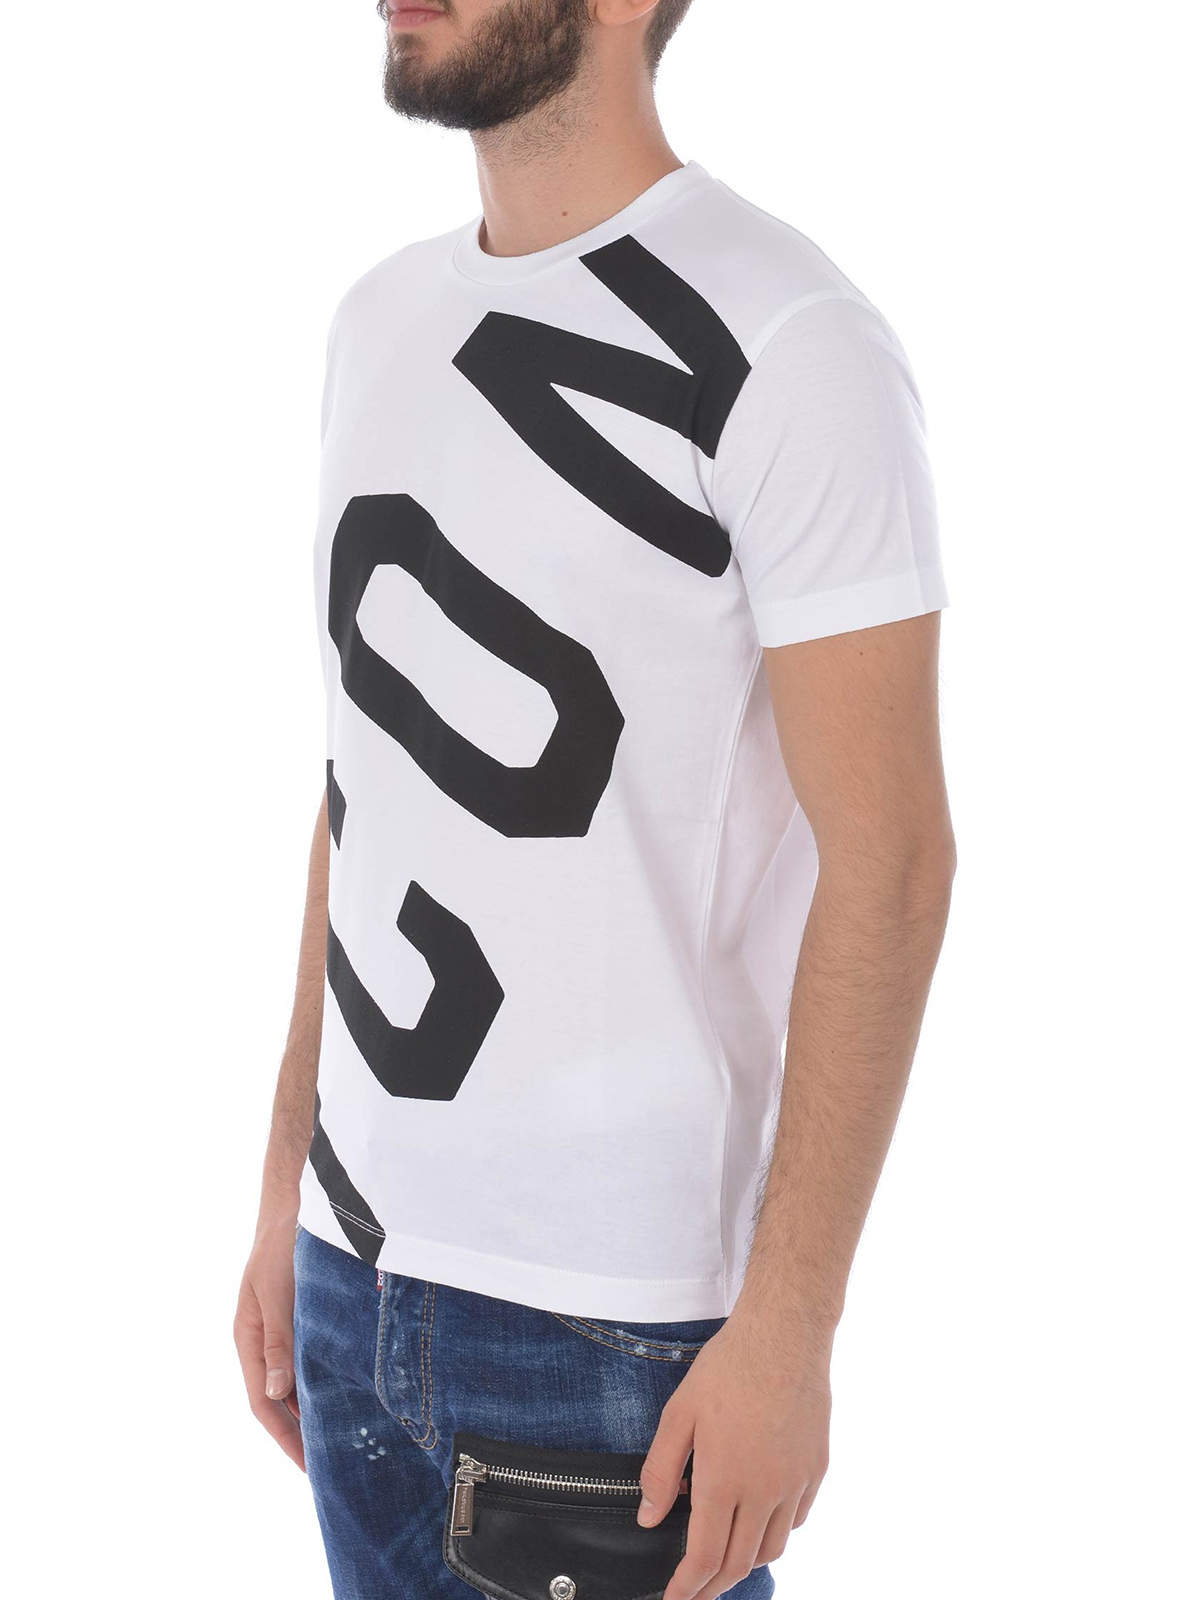 icon t shirt dsquared